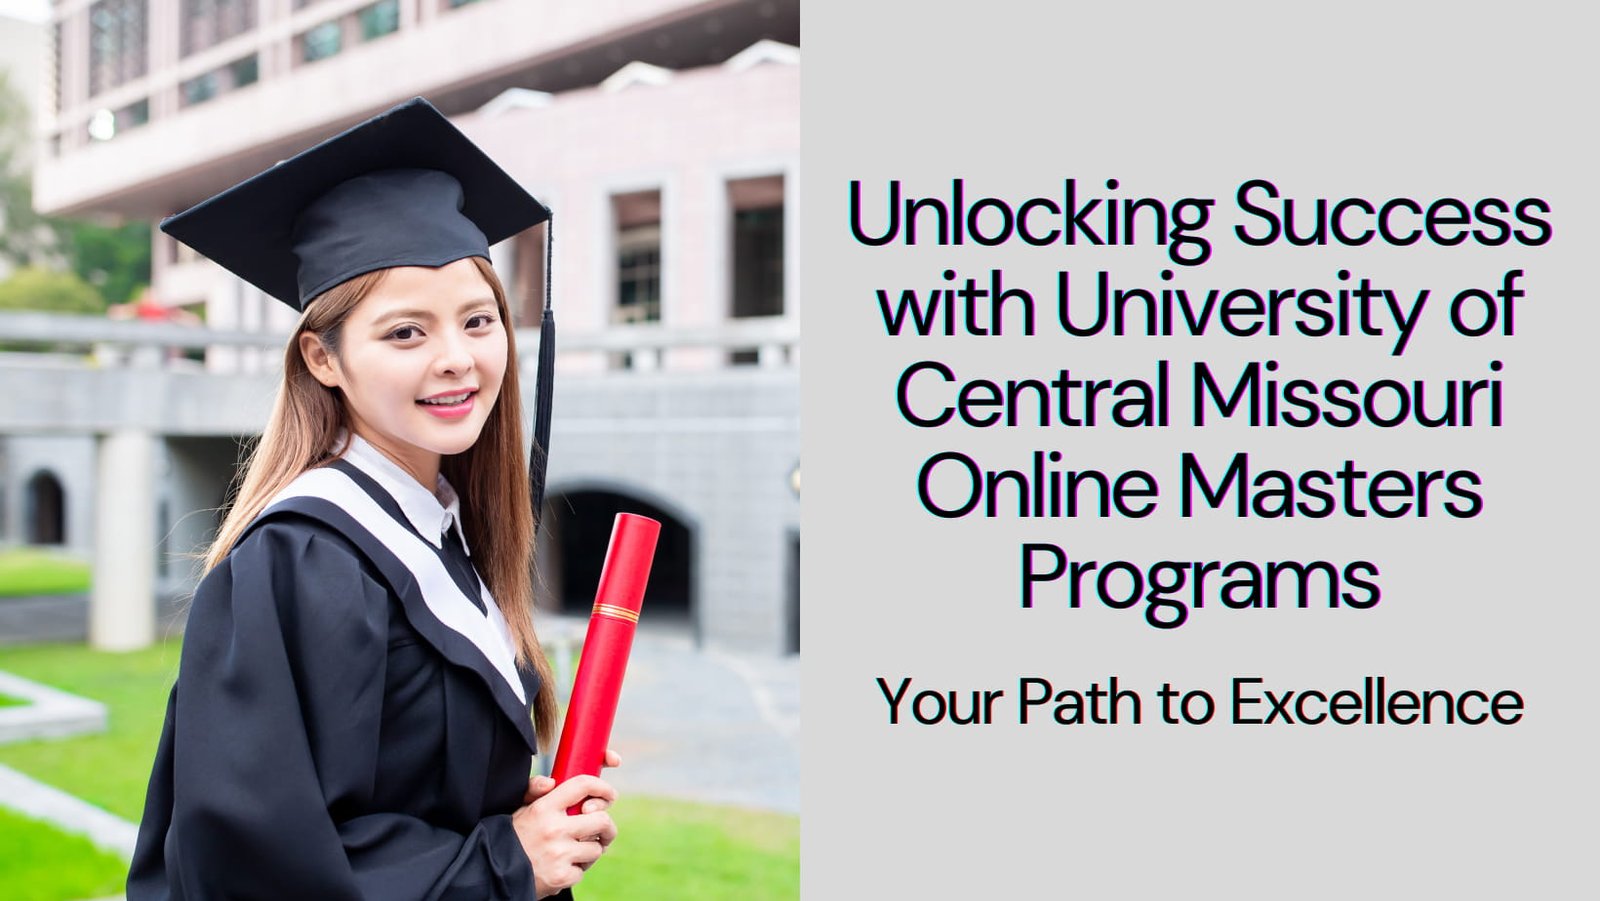 Unlocking Success with University of Central Missouri Online Masters Programs: Your Path to Excellence